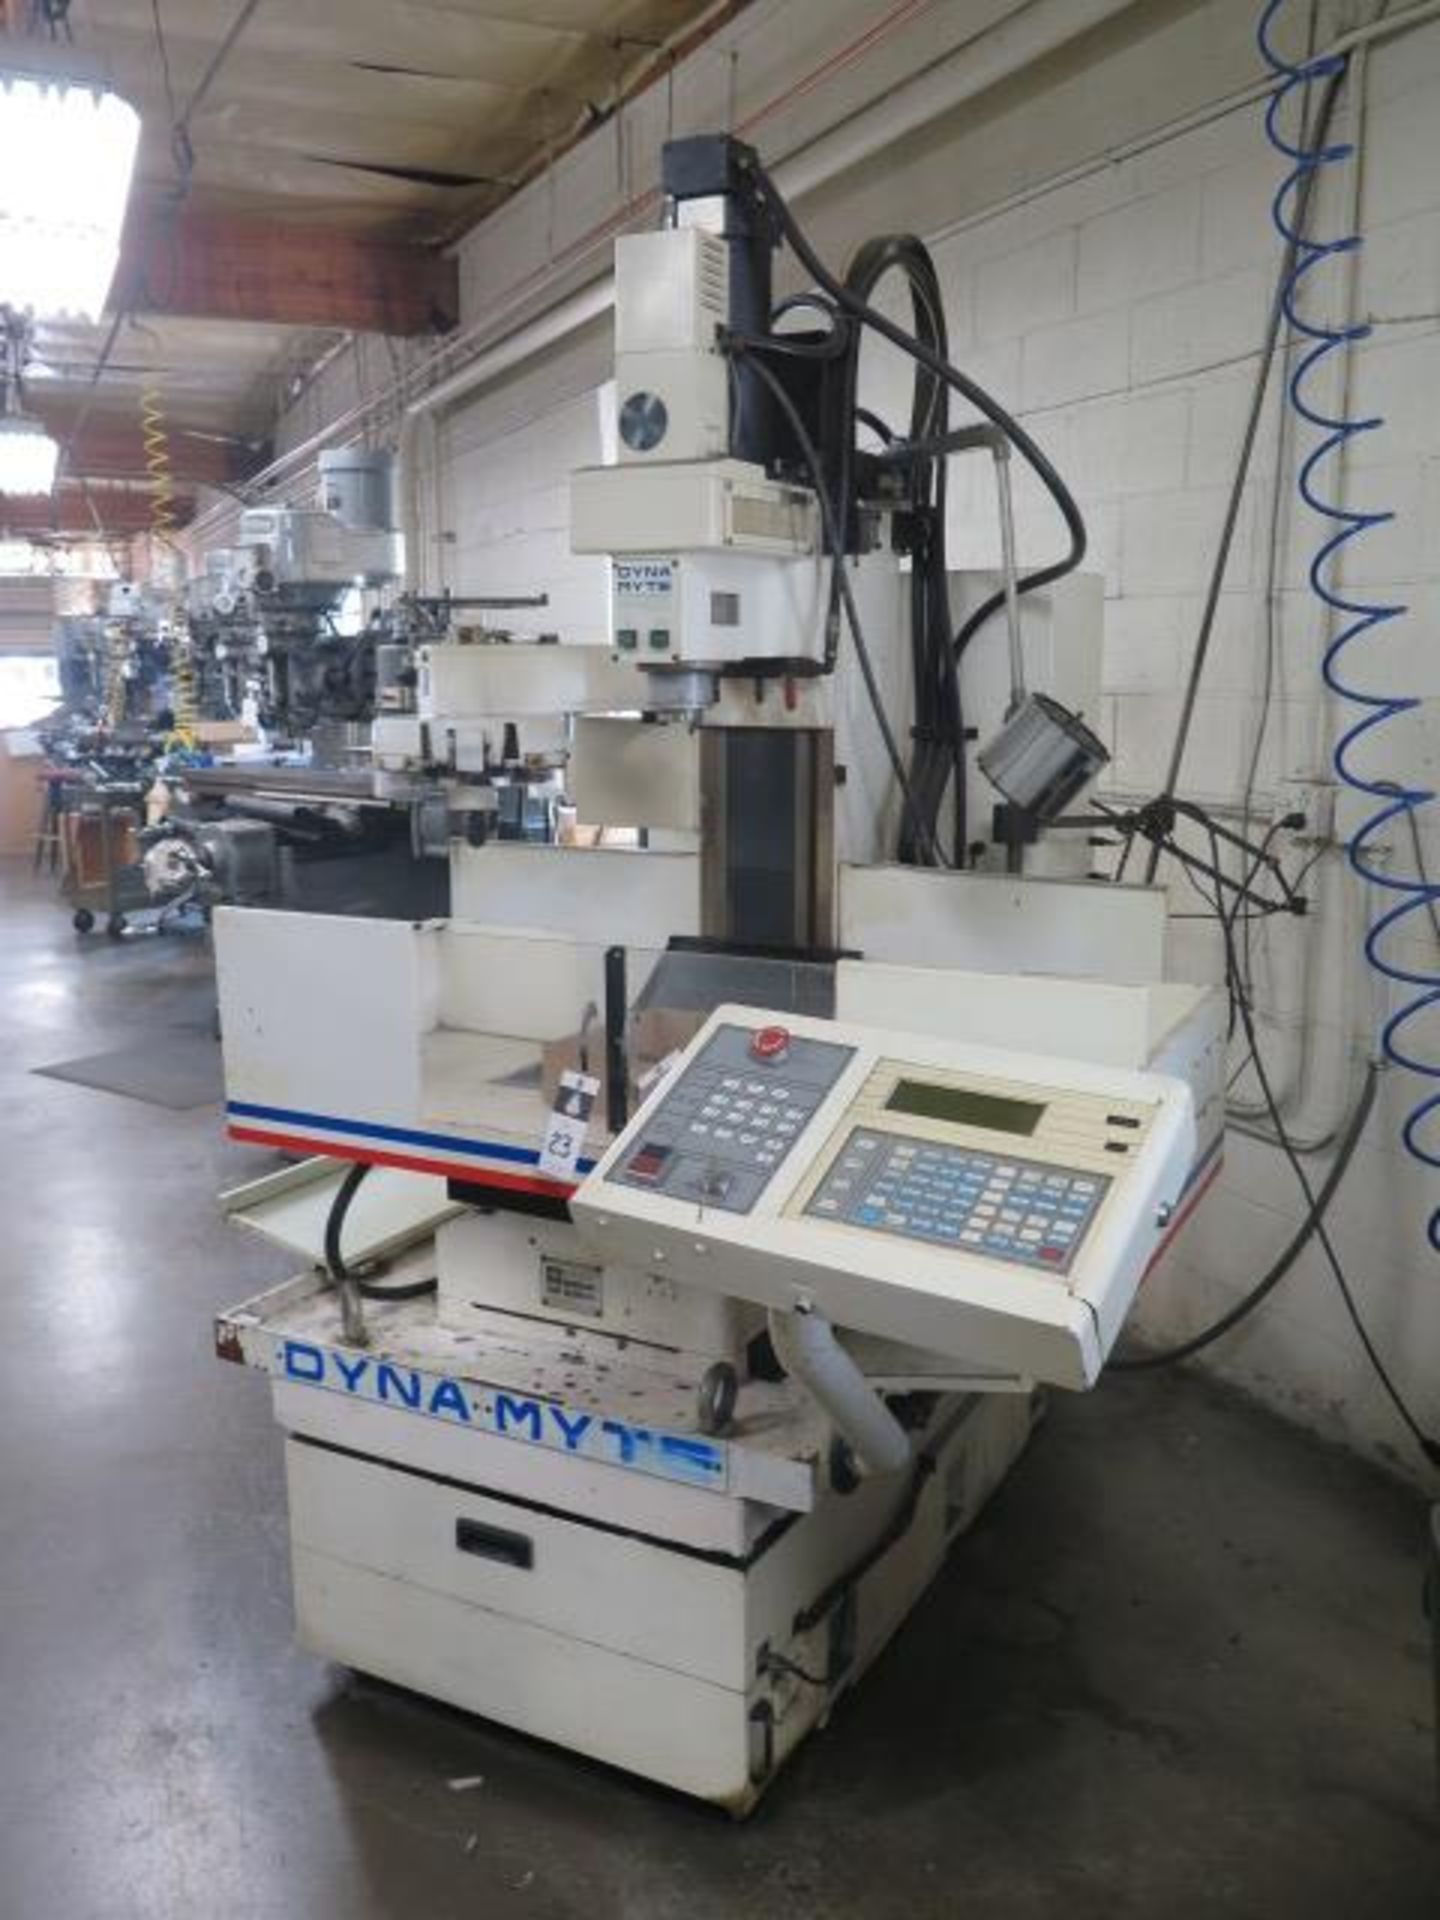 Dyna Myte 4400 CNC VMC w/ Dyna 44M Controls, 10-Station ATC, CAT-30 Taper, SOLD AS IS - Image 2 of 14